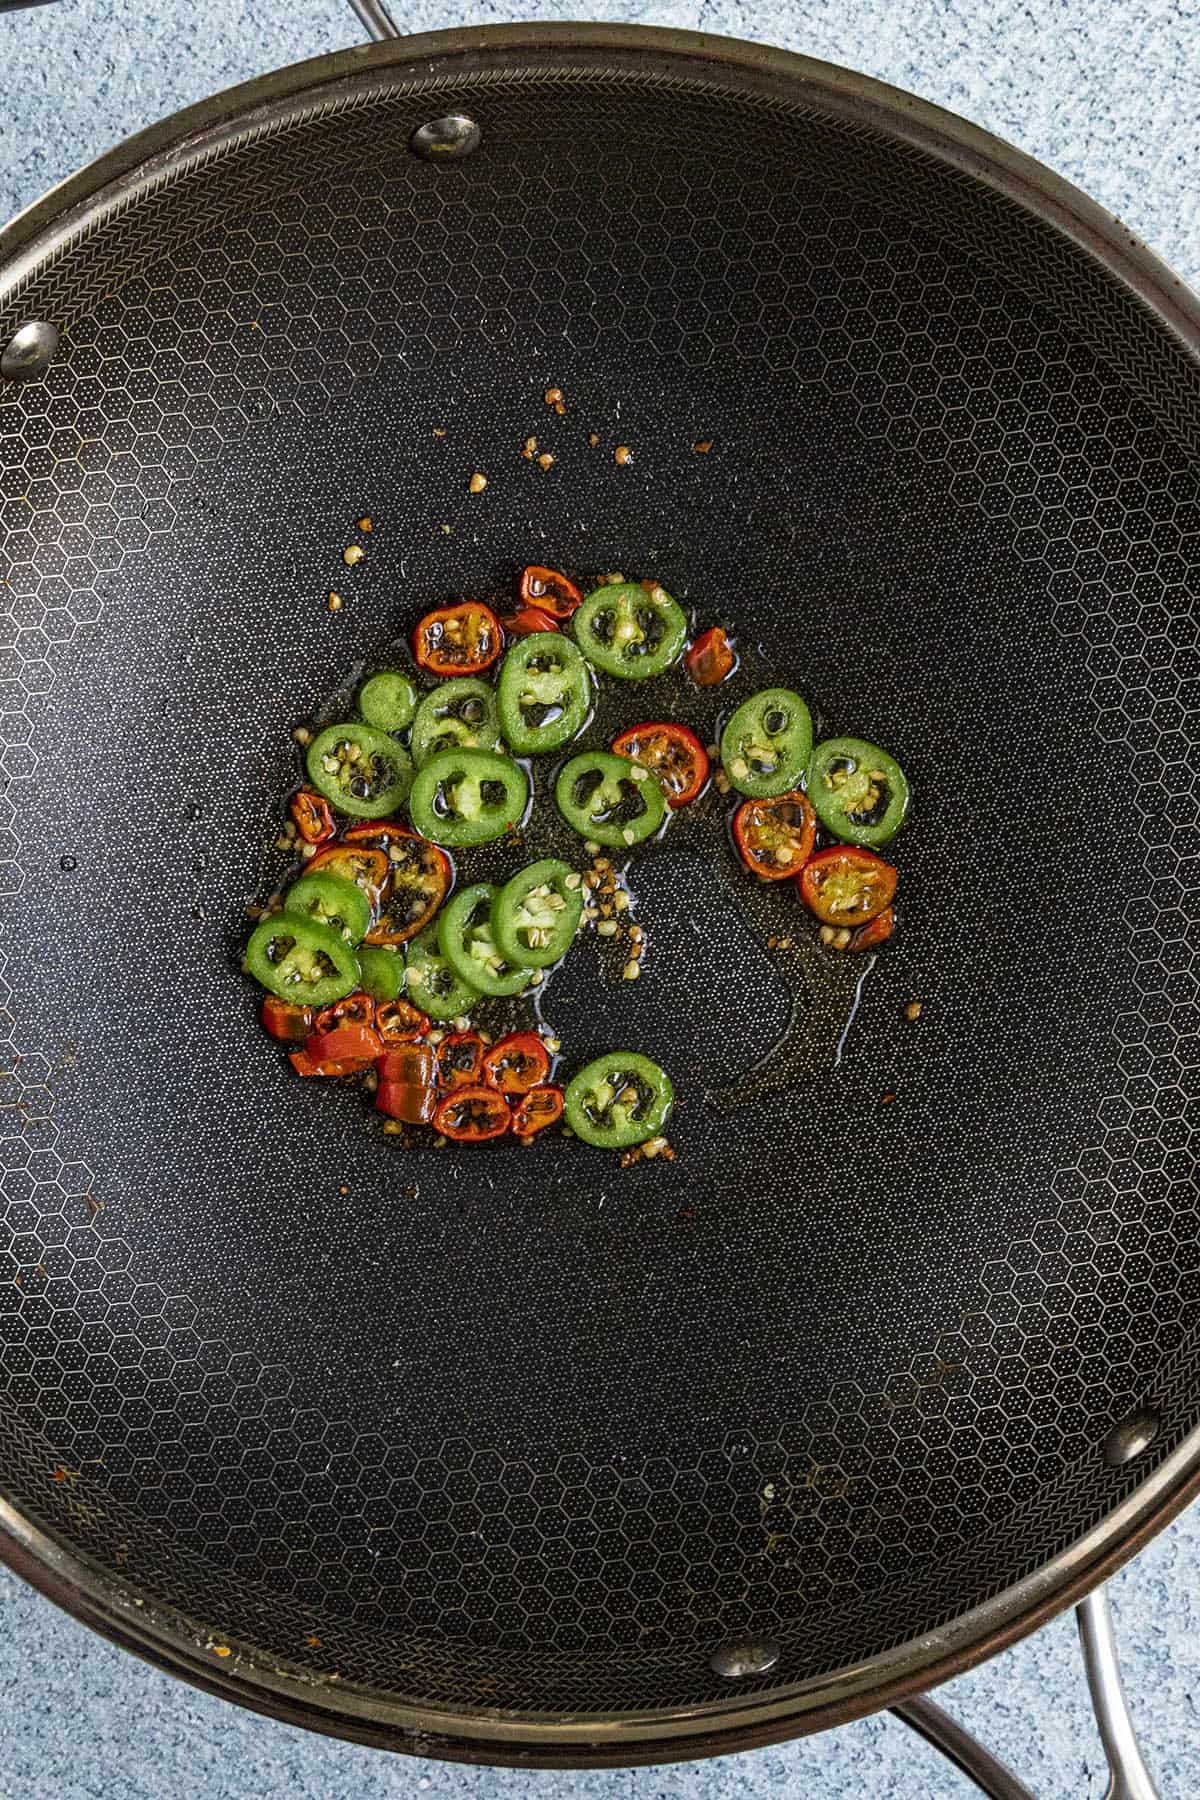 Cooking spicy peppers in a hot pan to make Spicy Noodles